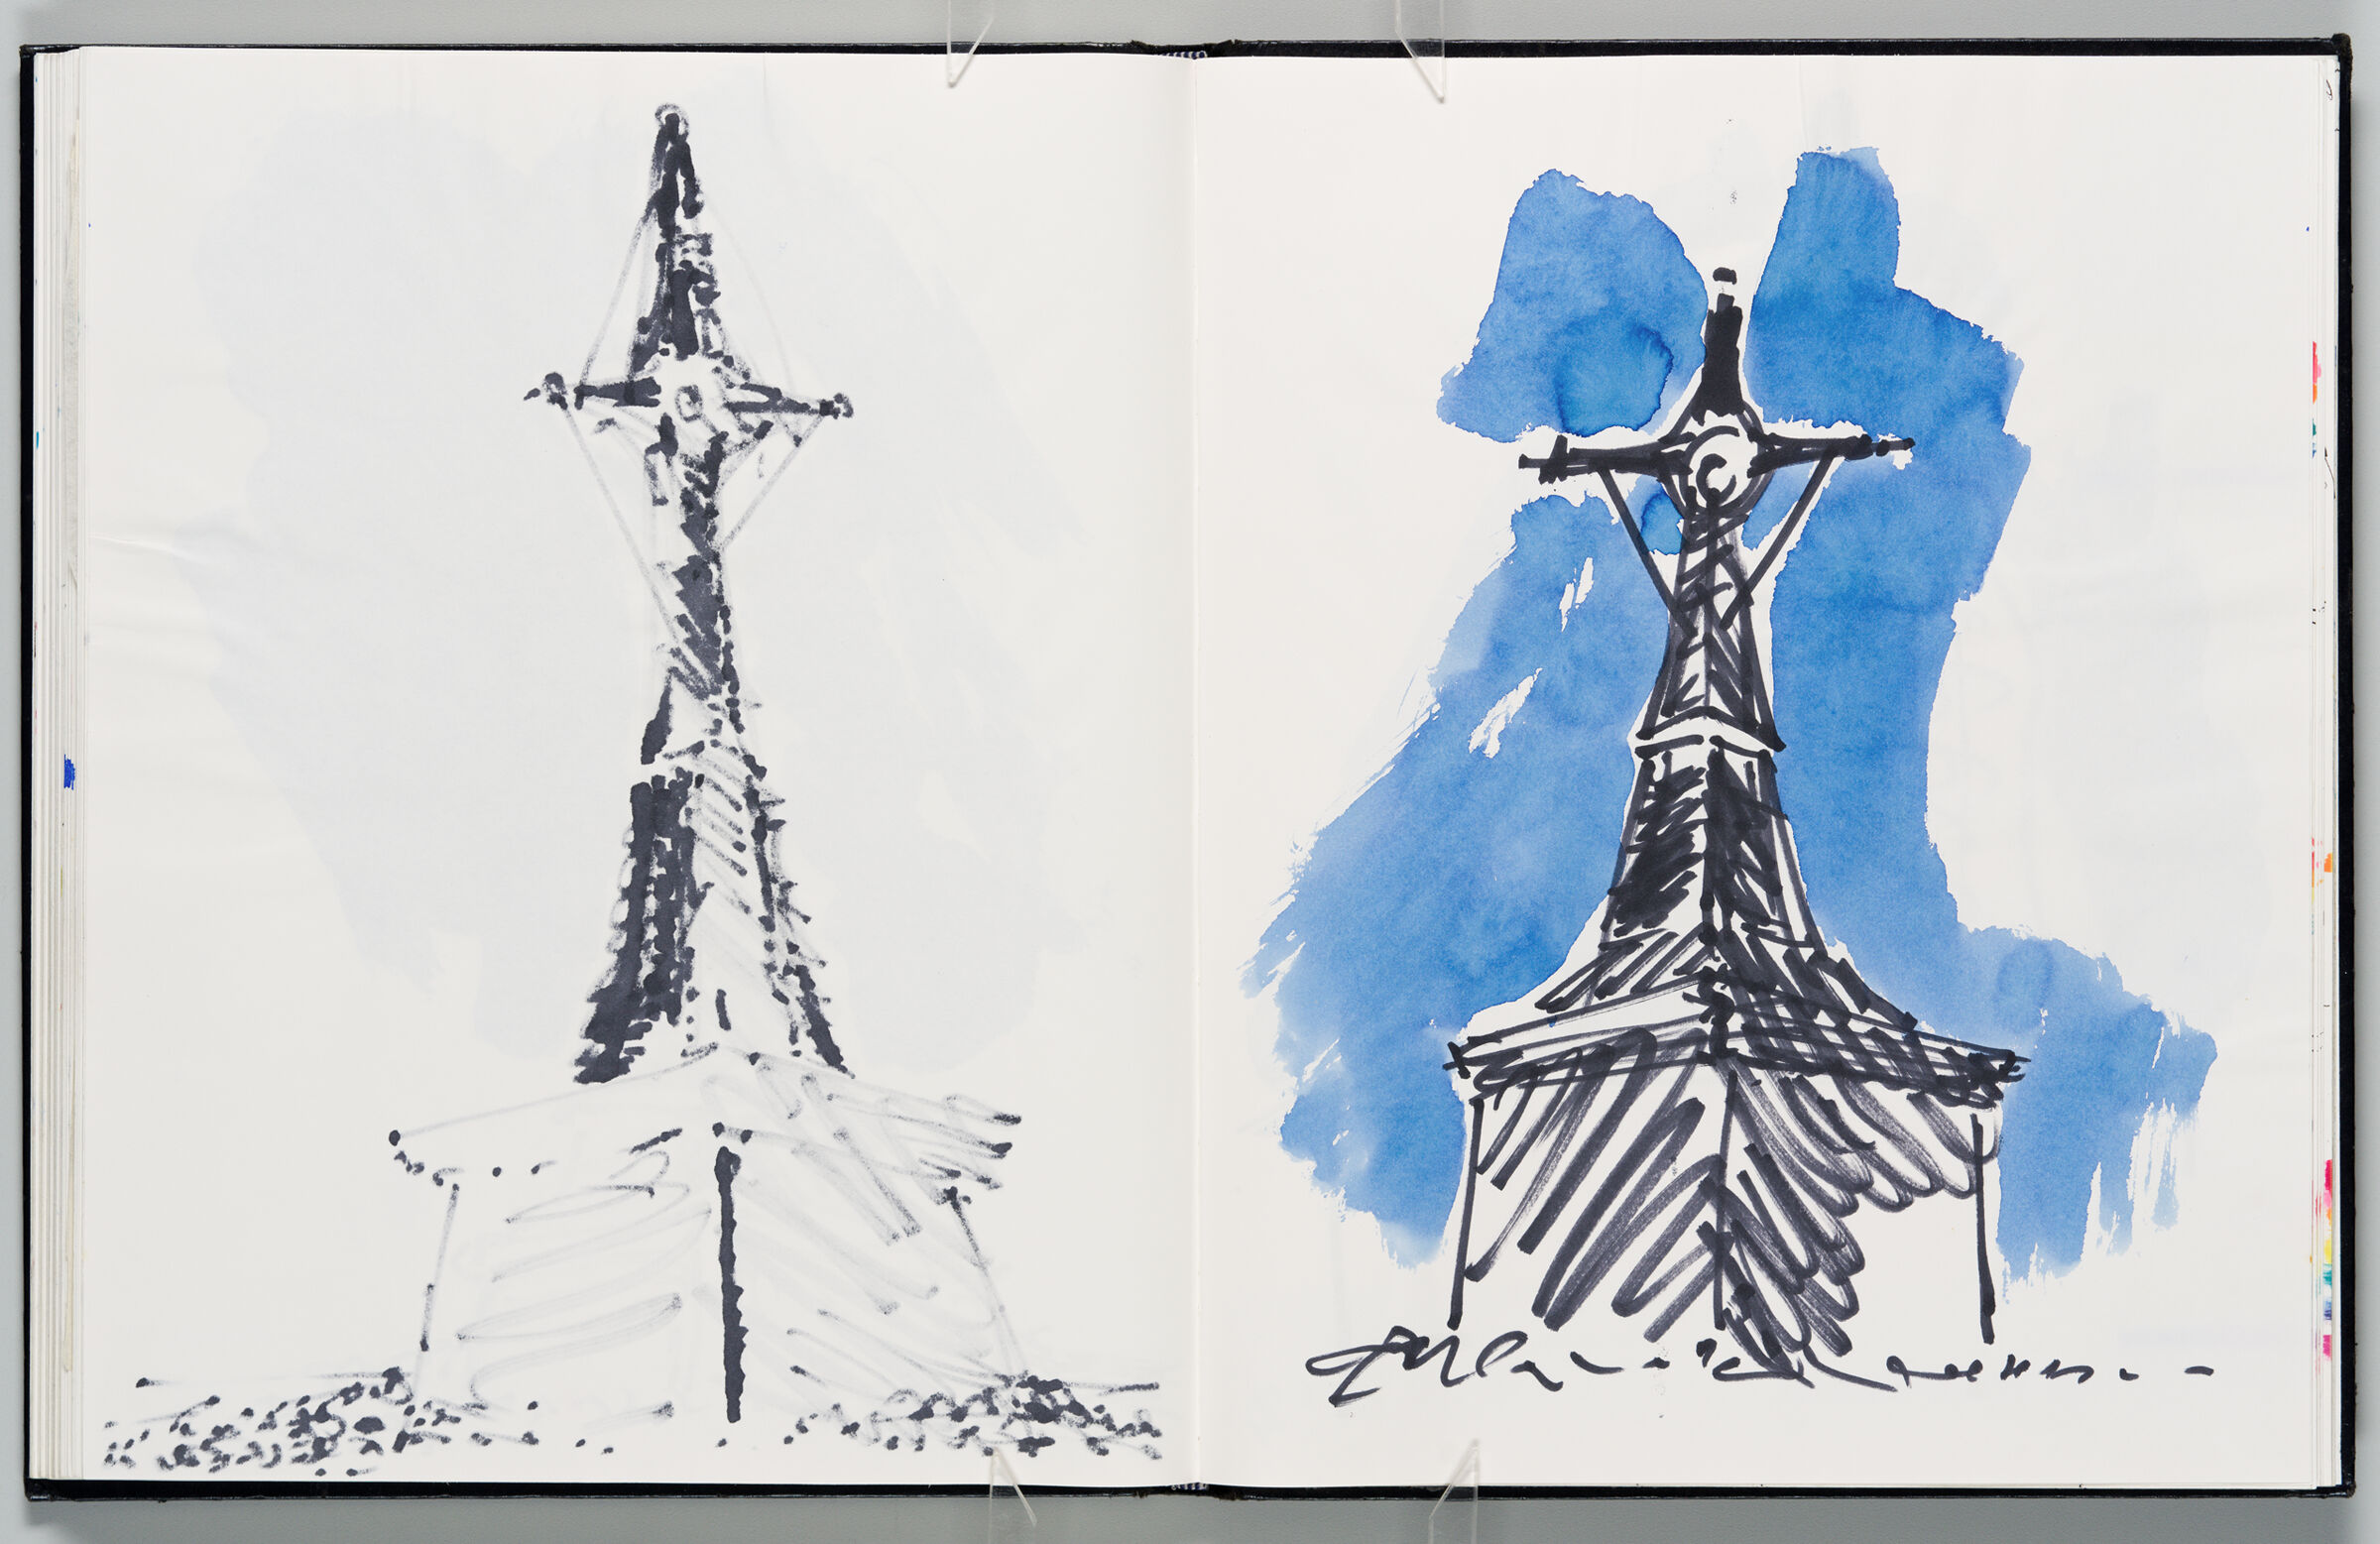 Untitled (Bleed-Through Of Previous Page, Left Page); Untitled (St. Véran, Right Page)